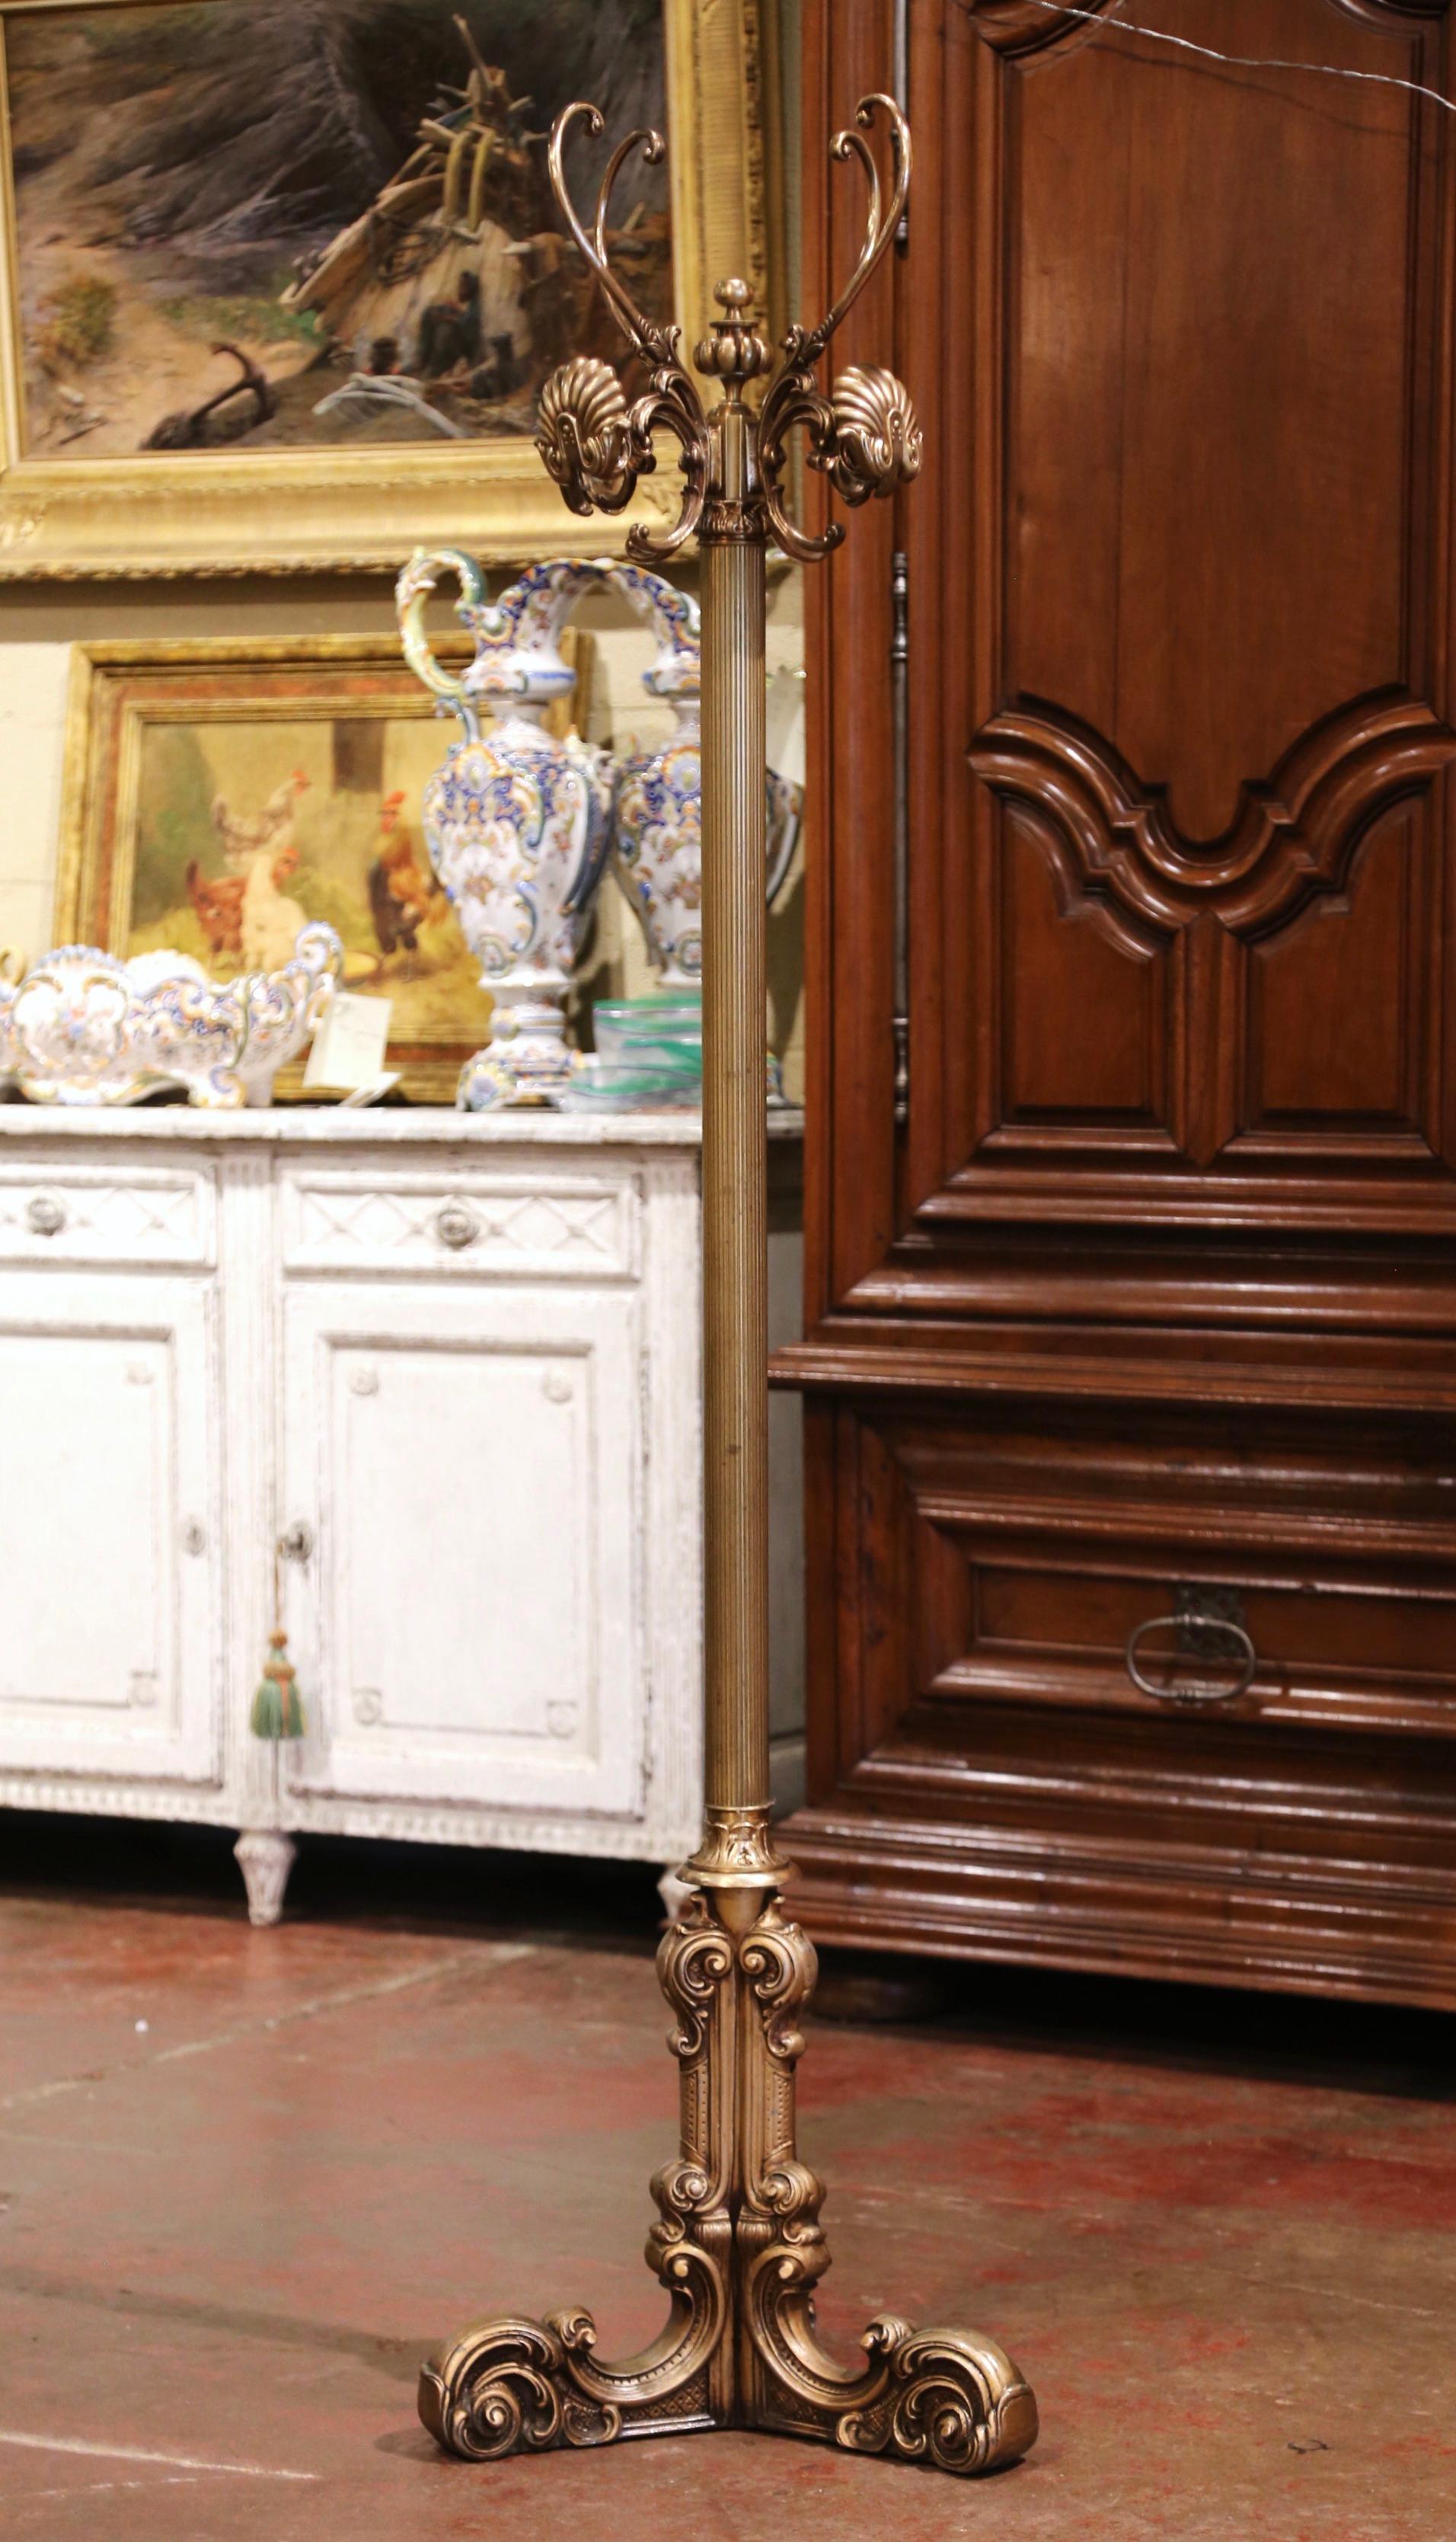 This antique brass hall tree was crafted in Italy circa 1920. Standing on a intricate base with three scrolled legs ending with leaf decor feet, the rack features a tall fluted central stem. The top dressed with a central finial, features a swivel